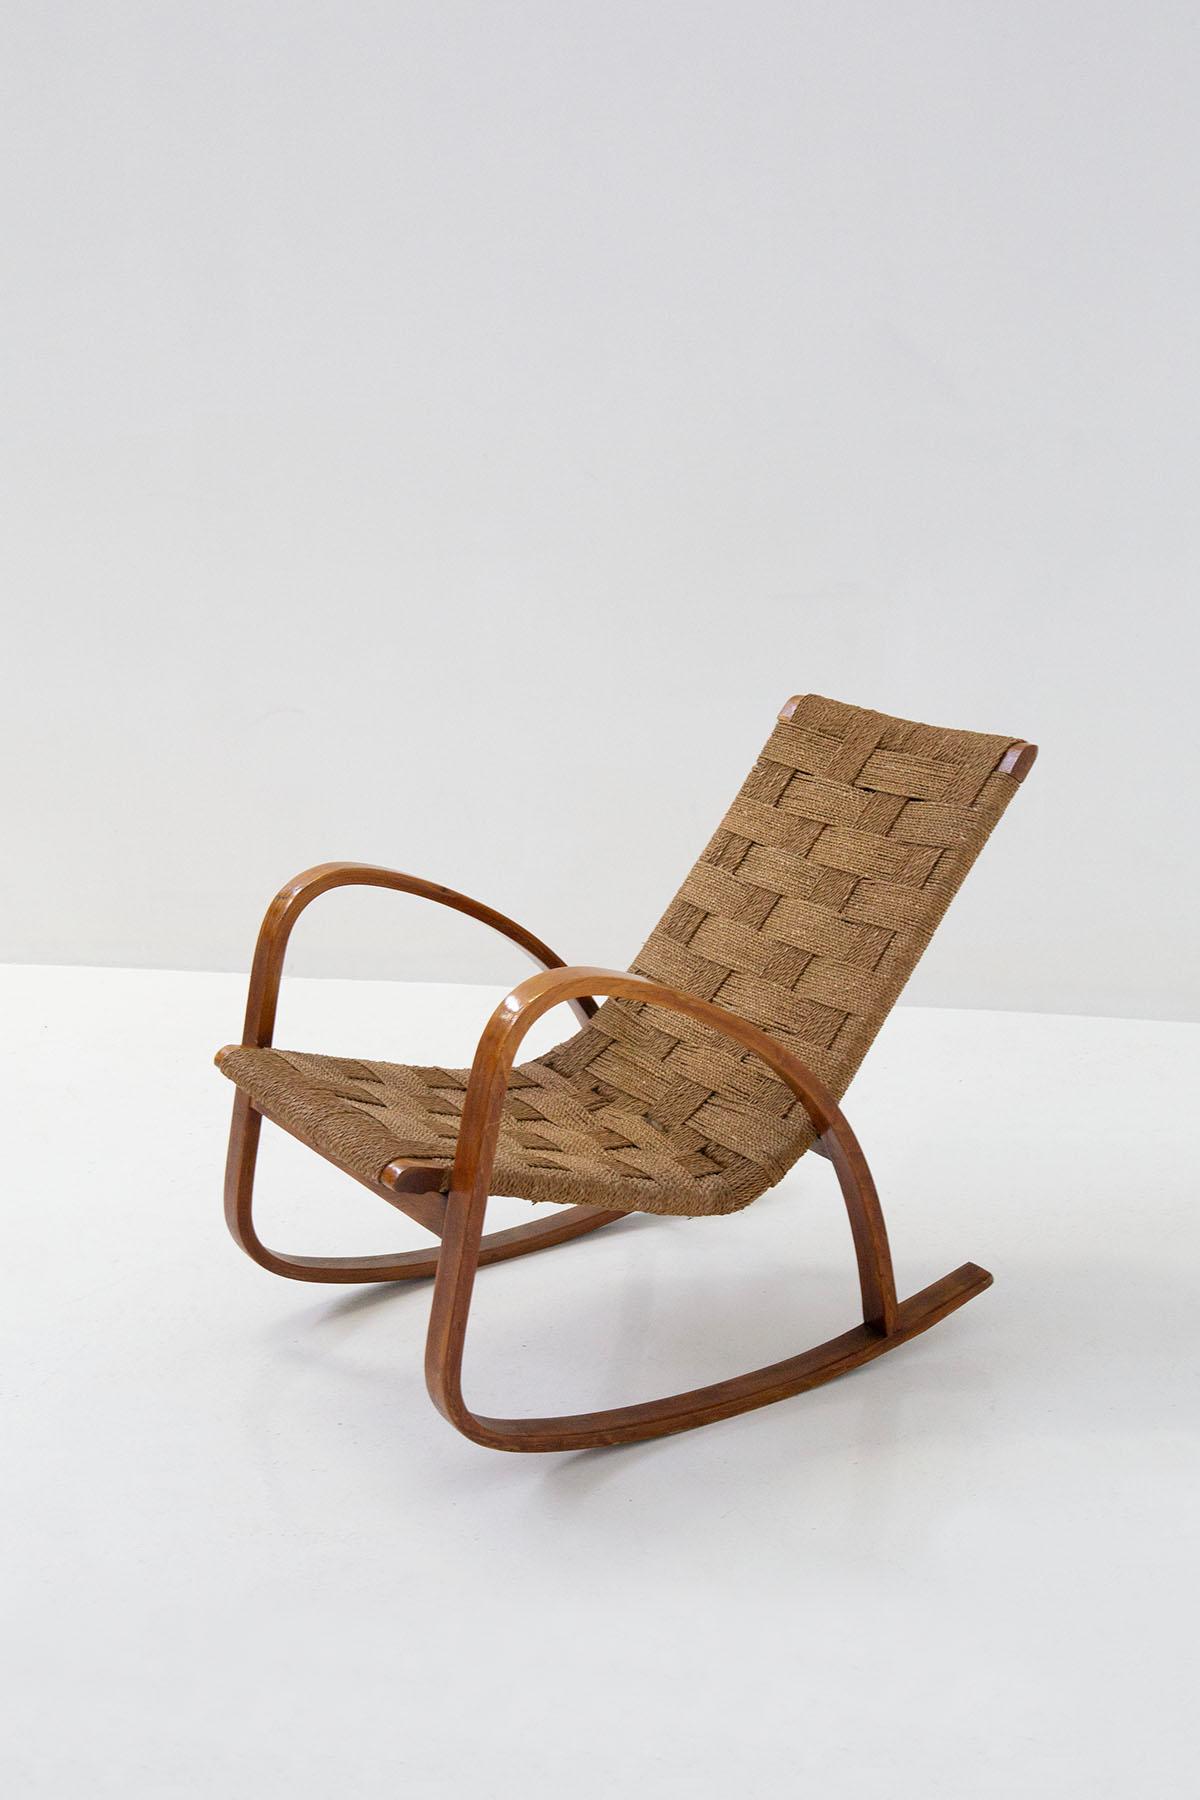 Rare rocking chair from the 1920s Italian Rationalist period of Italian manufacture. The armchair is placed in the European Bauhaus period. The armchair is well constructed with solid wood surrounding its surface. While the seat and its back are a